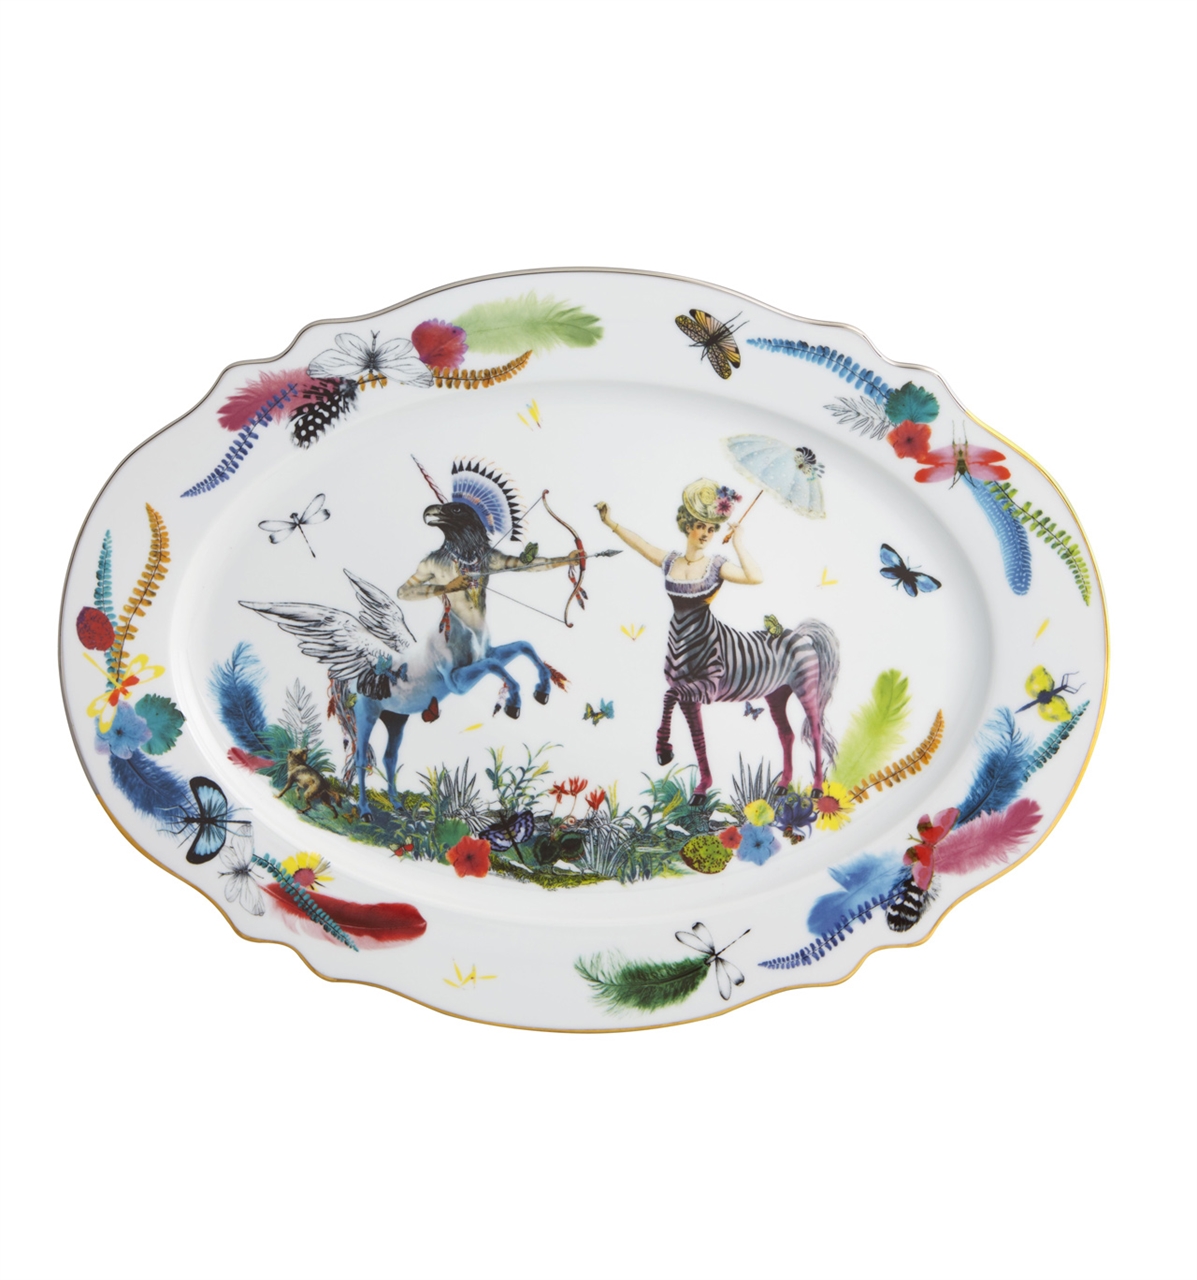 Vista Alegre Collection Caribe large oval plate by Christian Lacroix